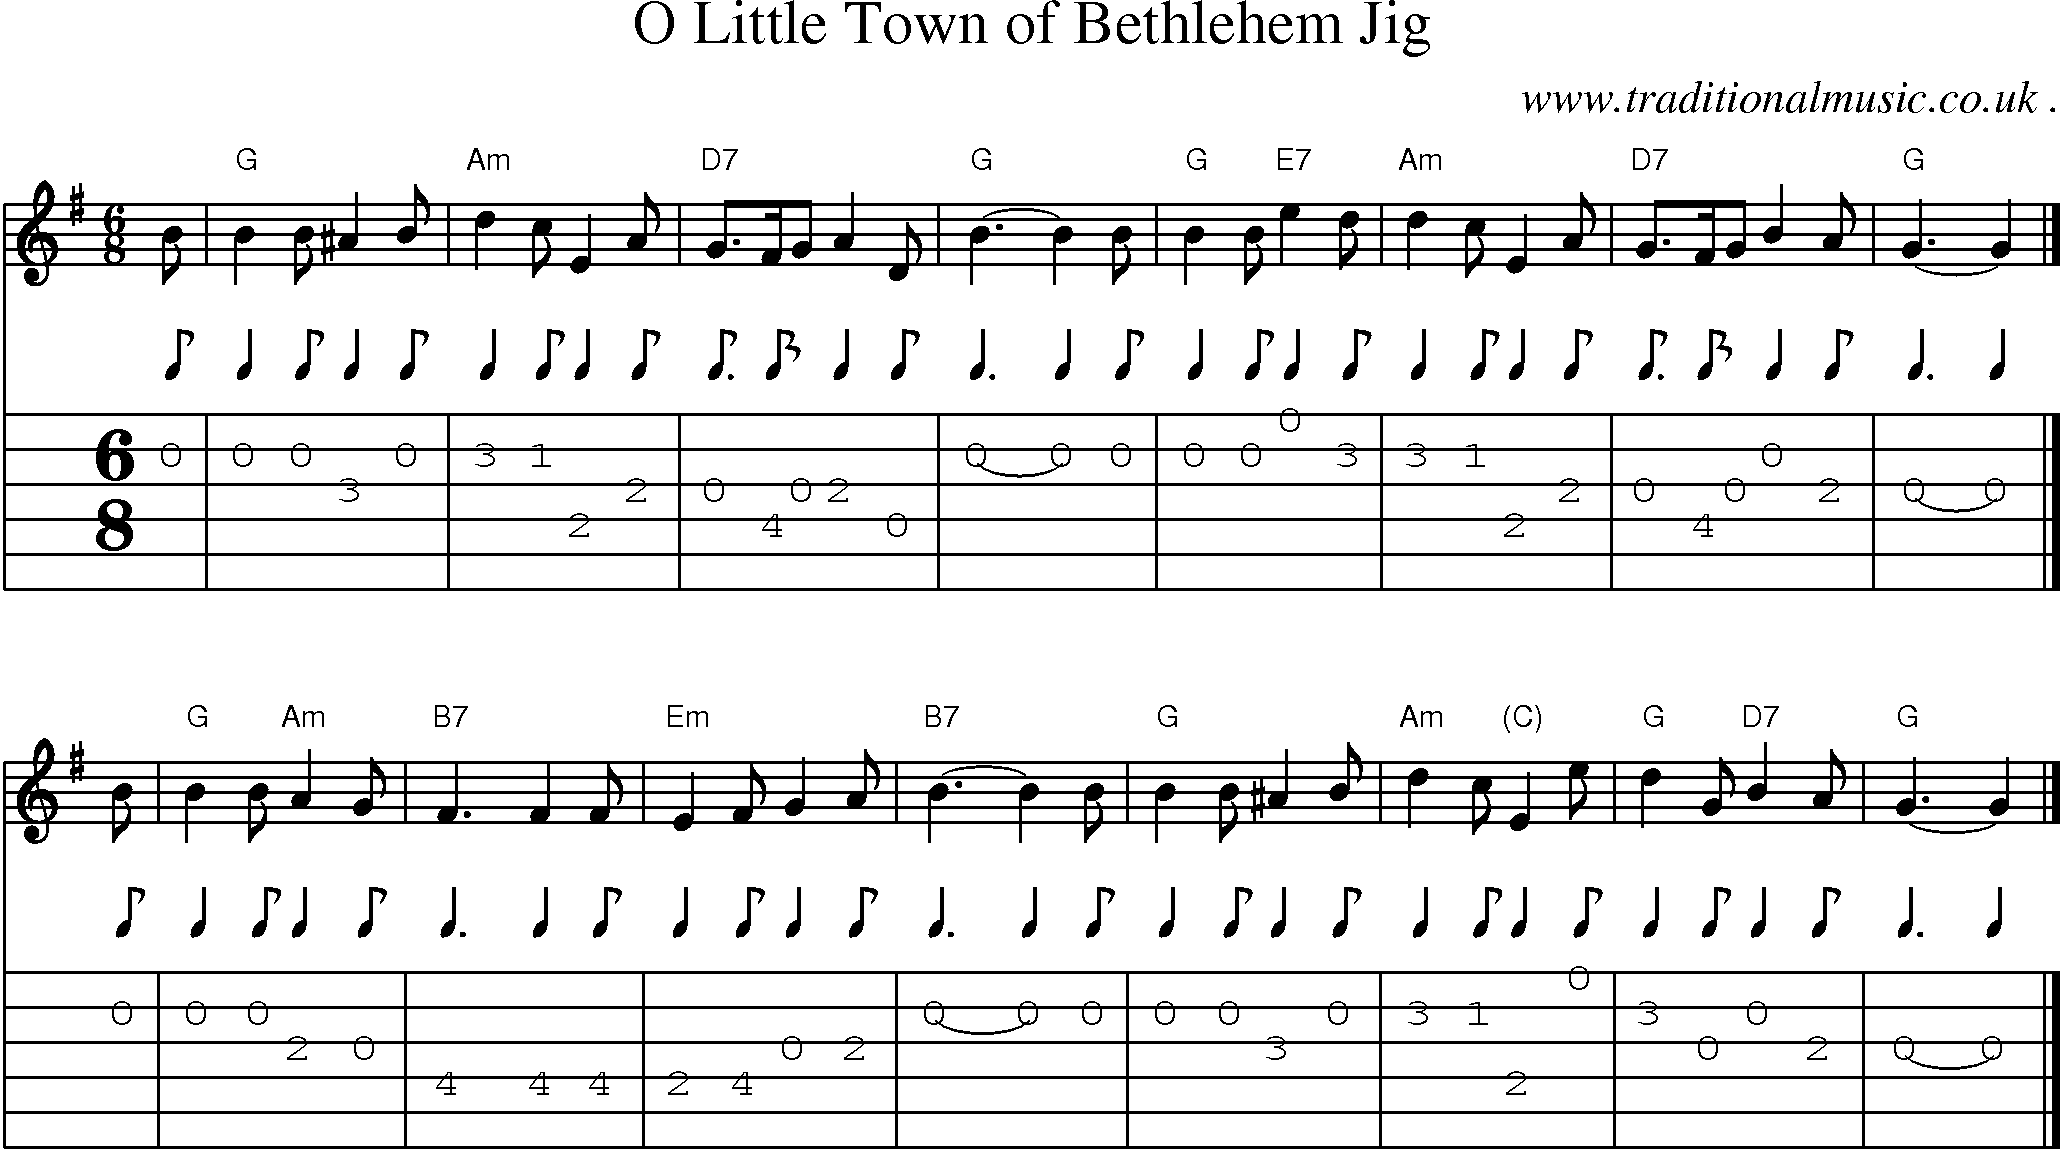 Sheet-music  score, Chords and Guitar Tabs for O Little Town Of Bethlehem Jig